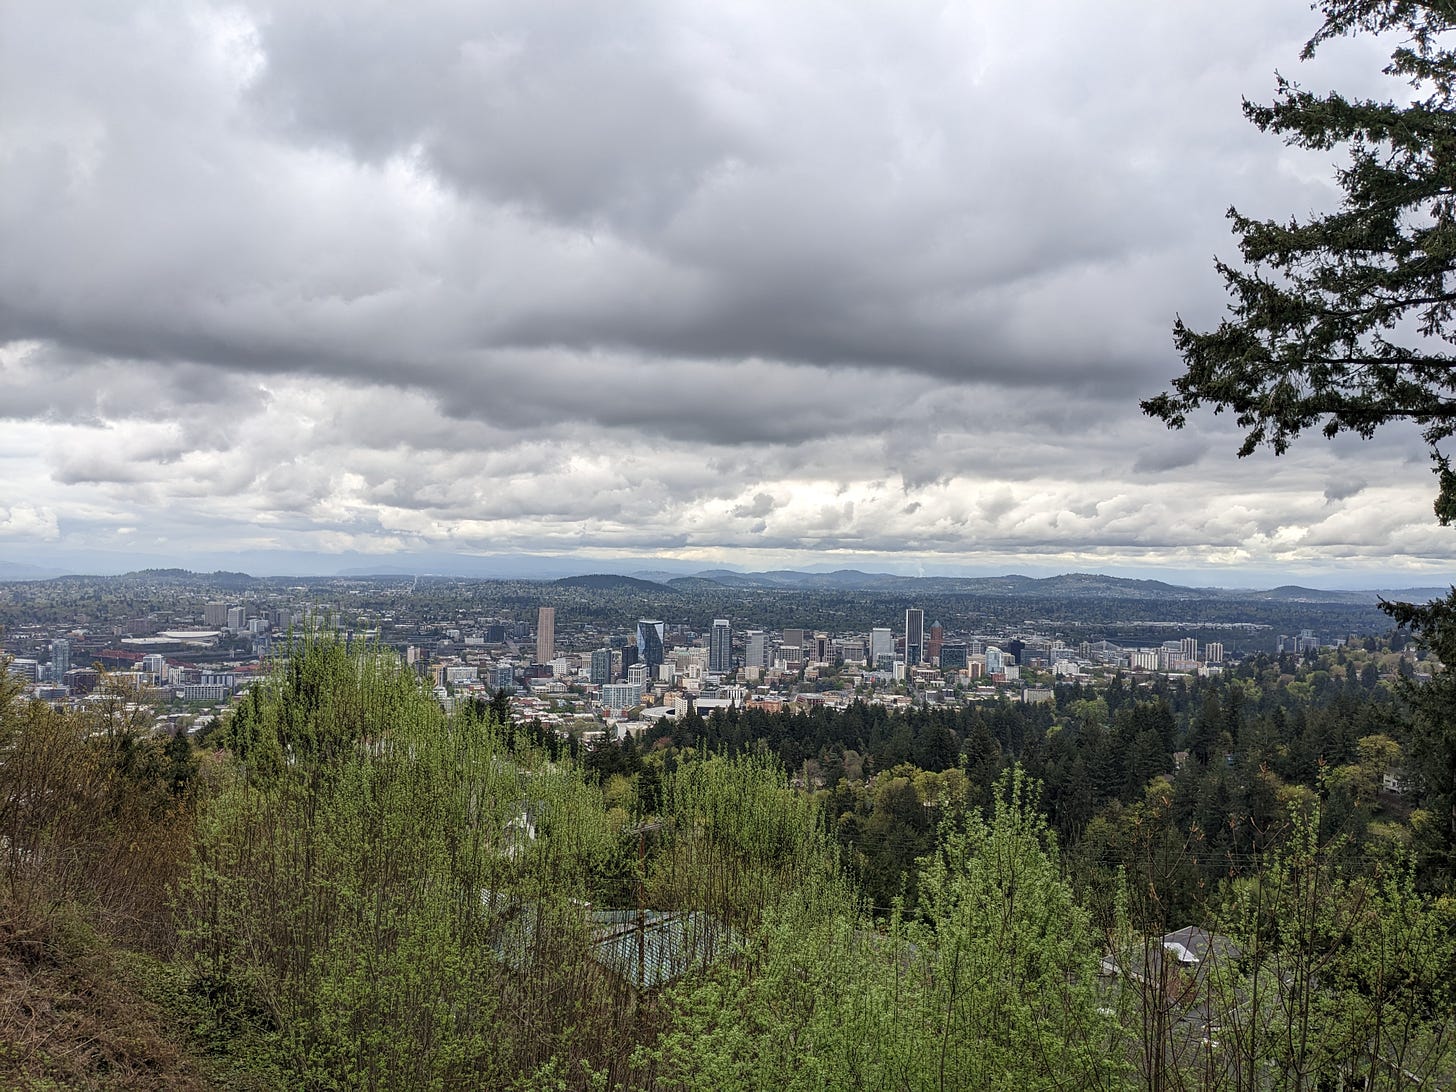 a view of a city from above with rolling mountains on the horizon and a gray cloudy sky